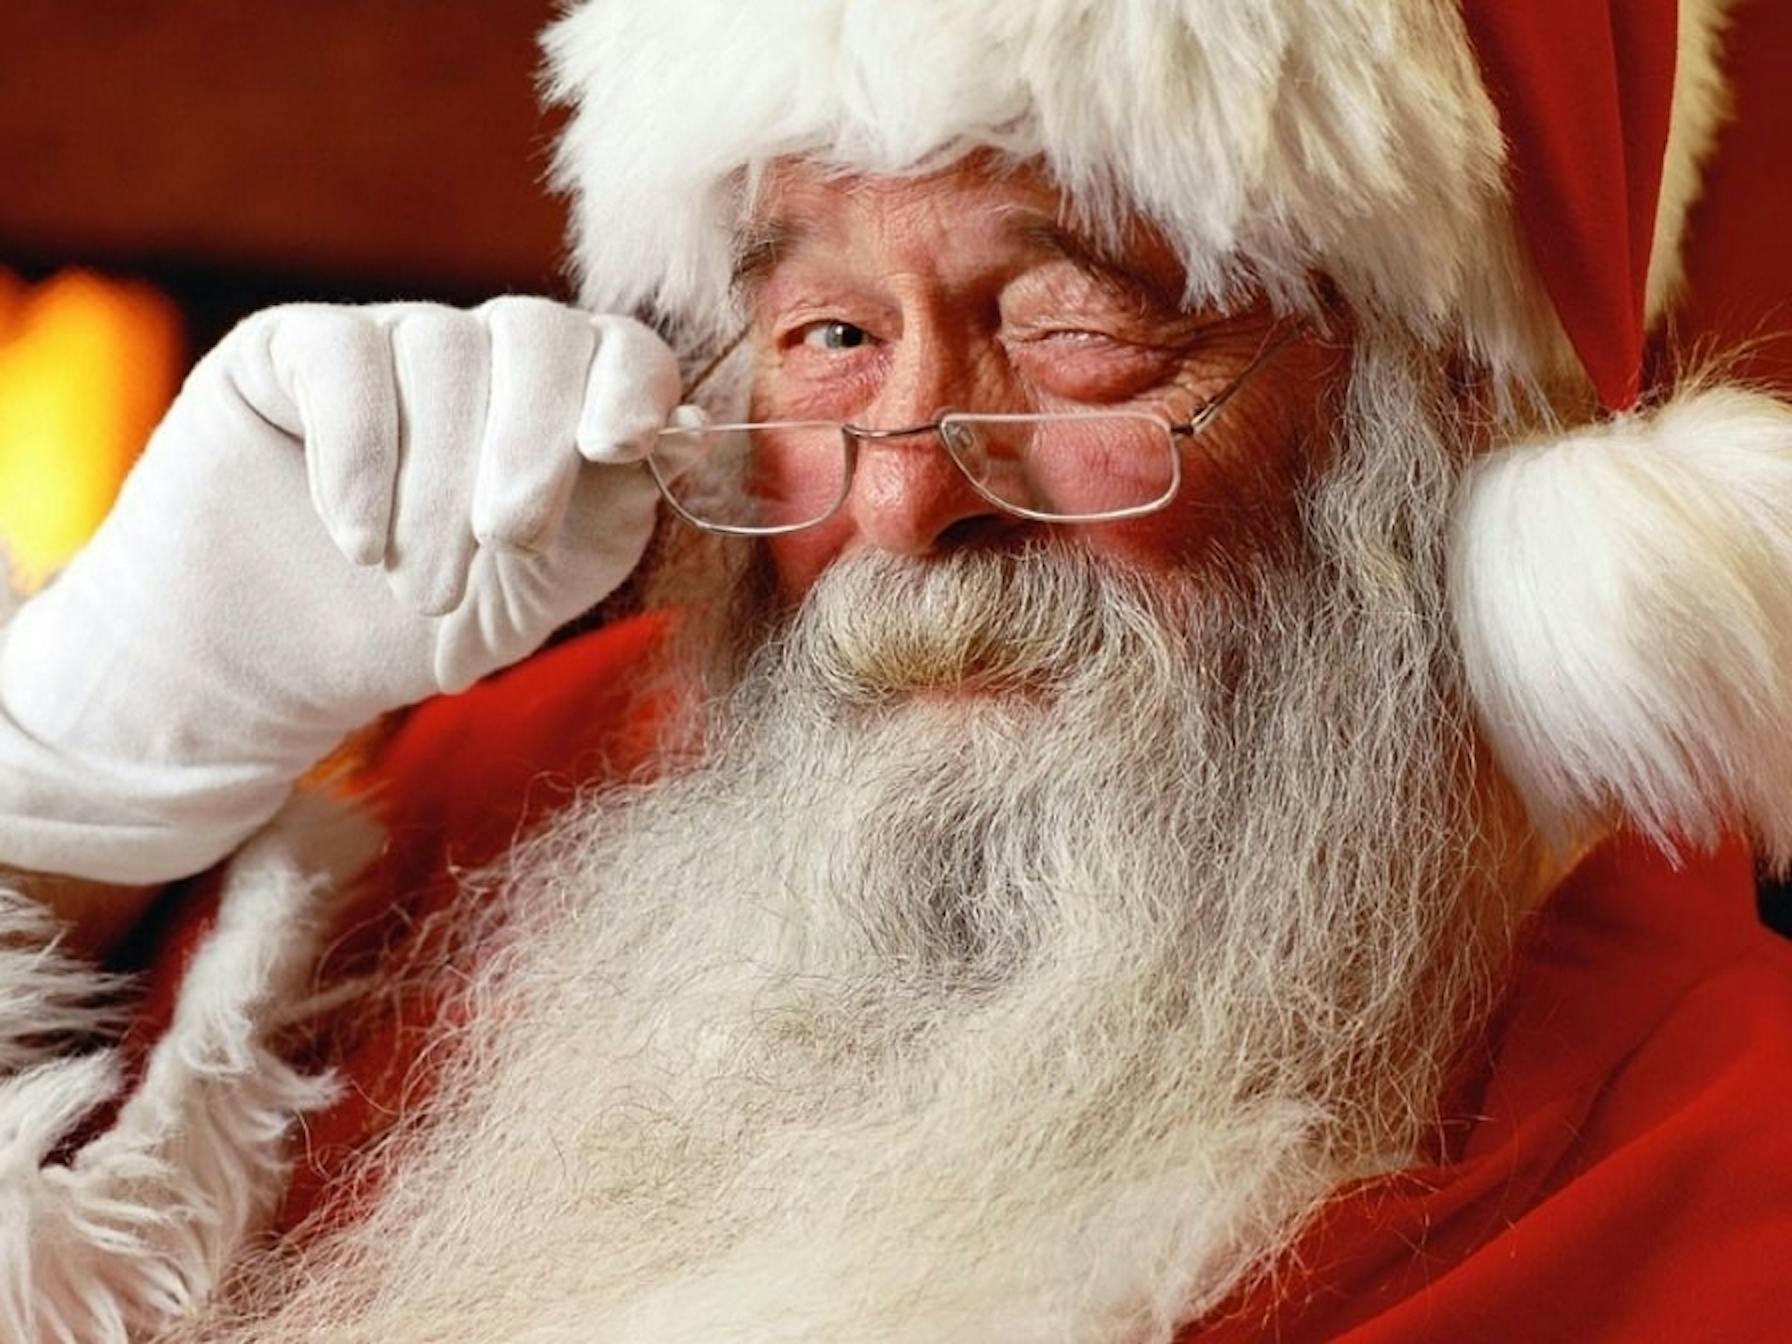 Christmas Themed Porn - Santa Claus is a Real Sex Symbol | Inverse